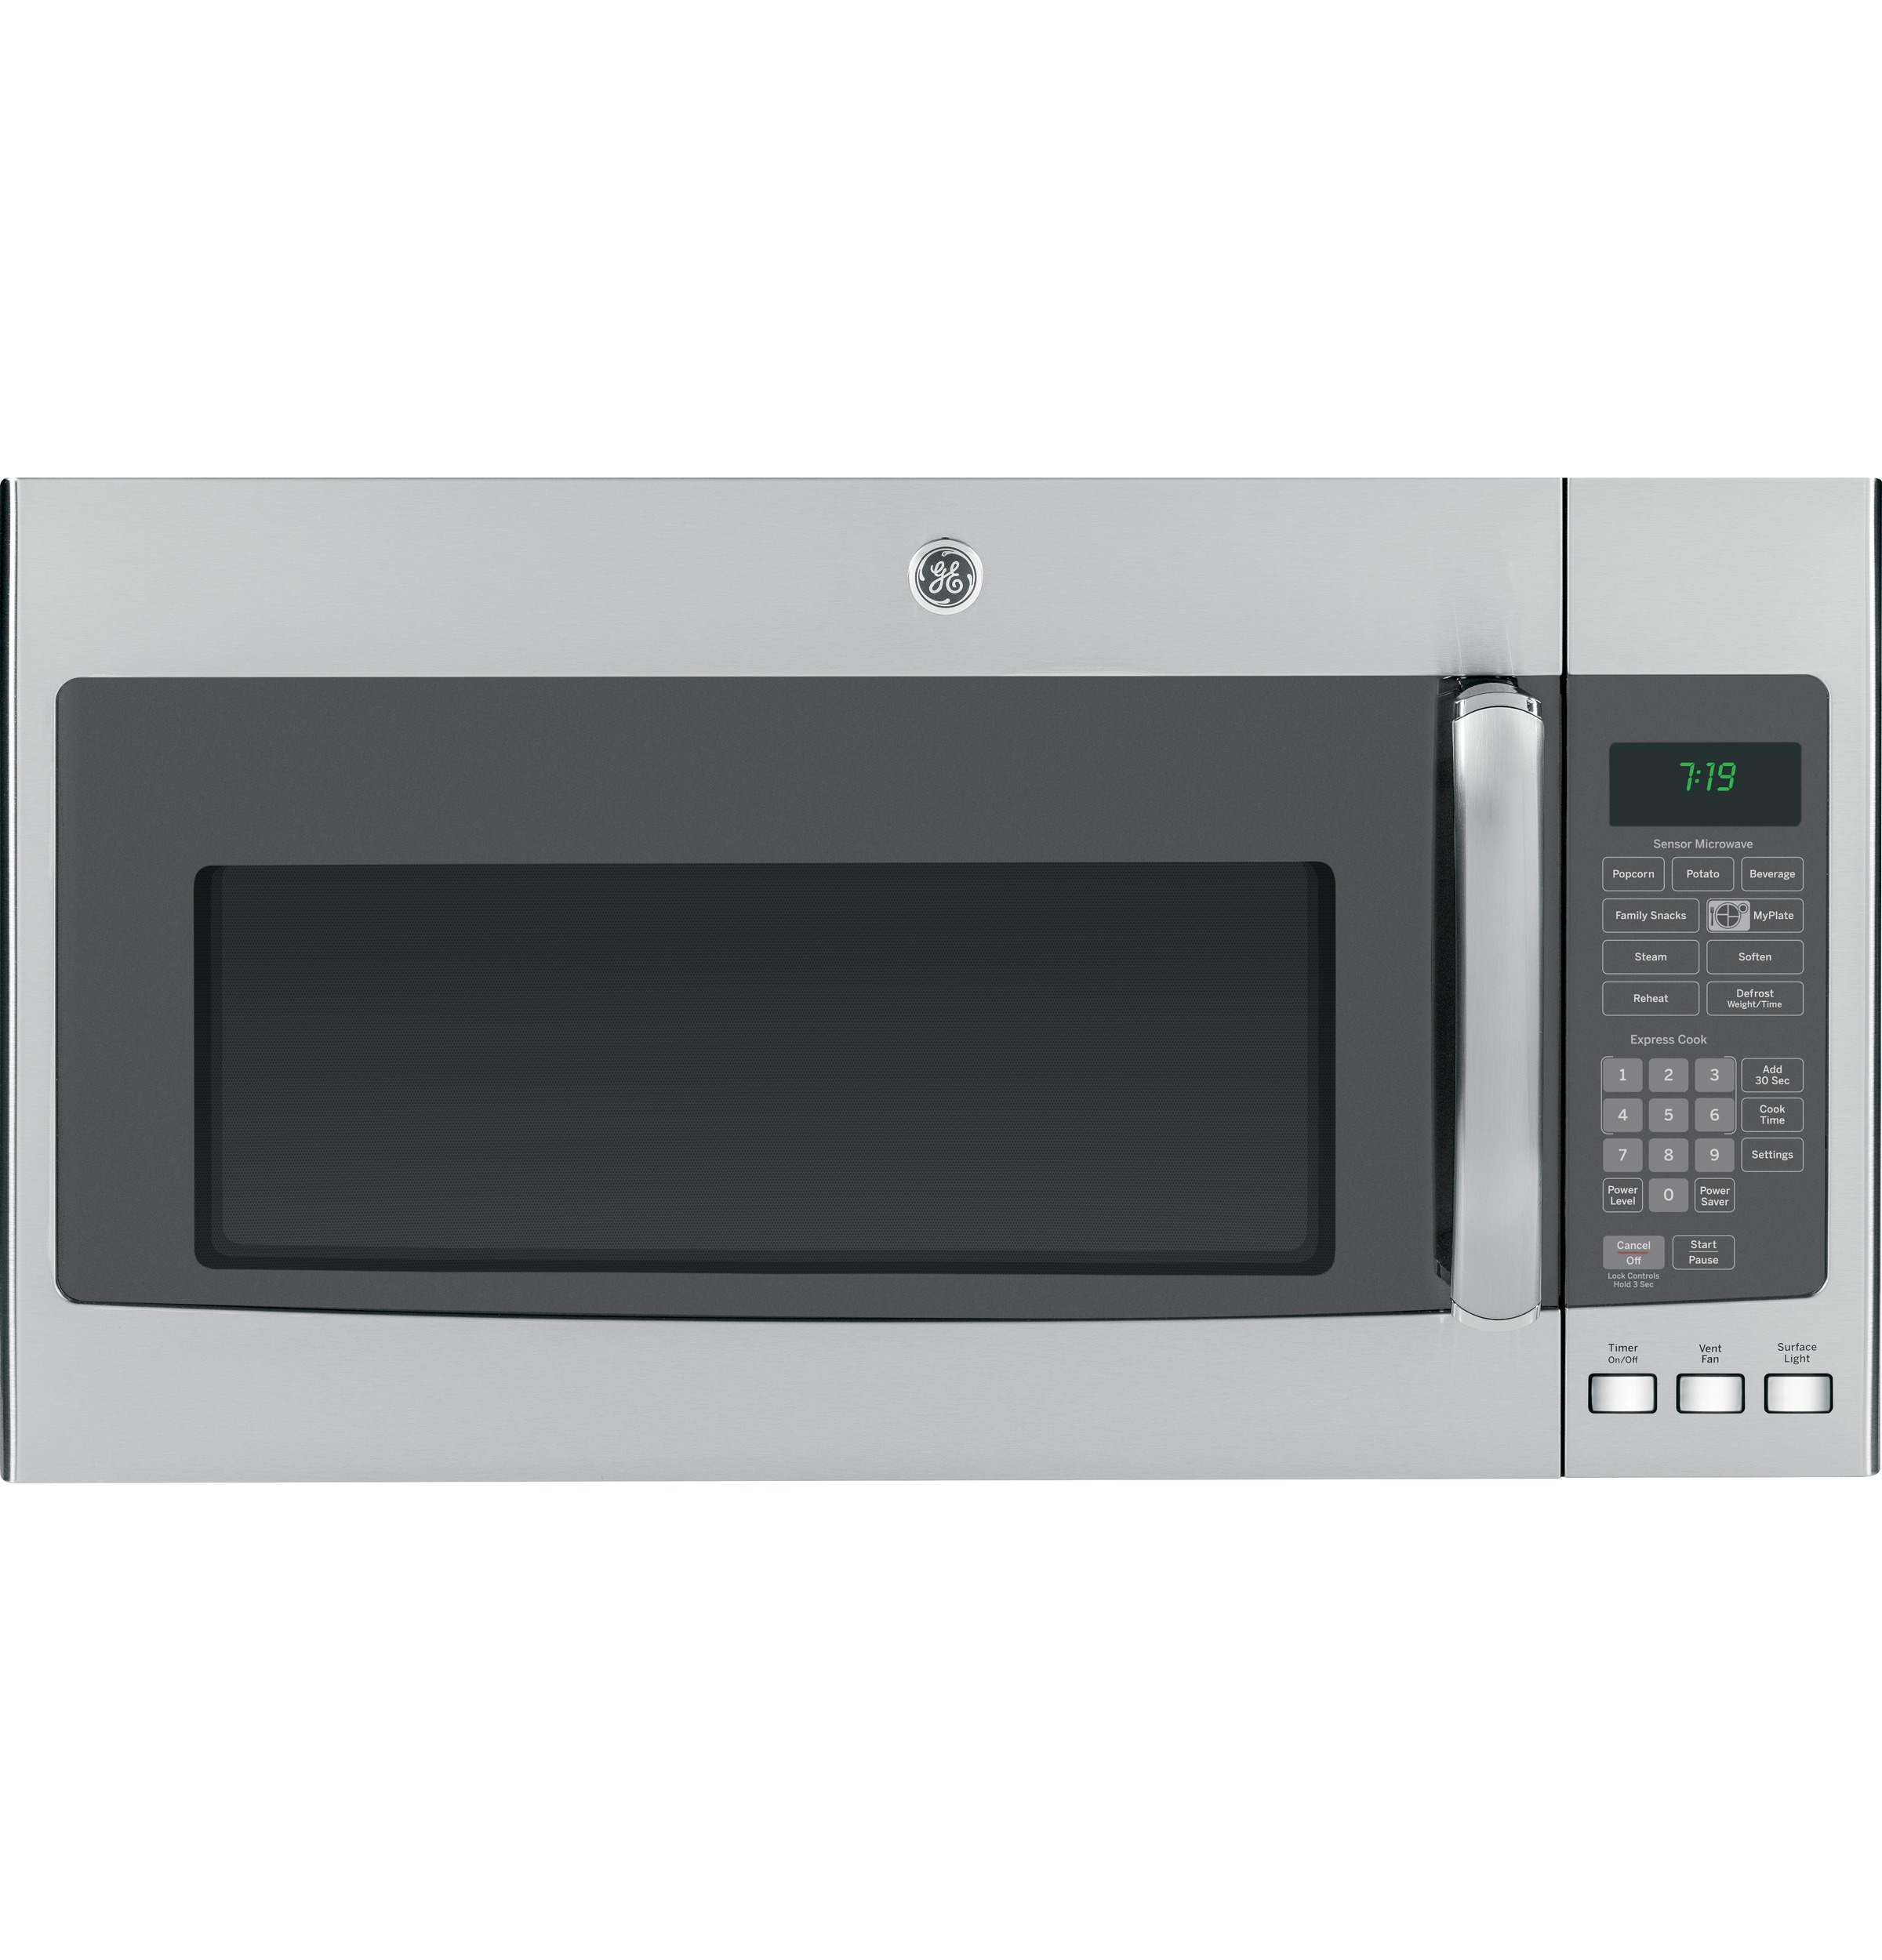 GE® Series 1.9 Cu. Ft. Over-the-Range Sensor Microwave Oven with Recirculating Venting